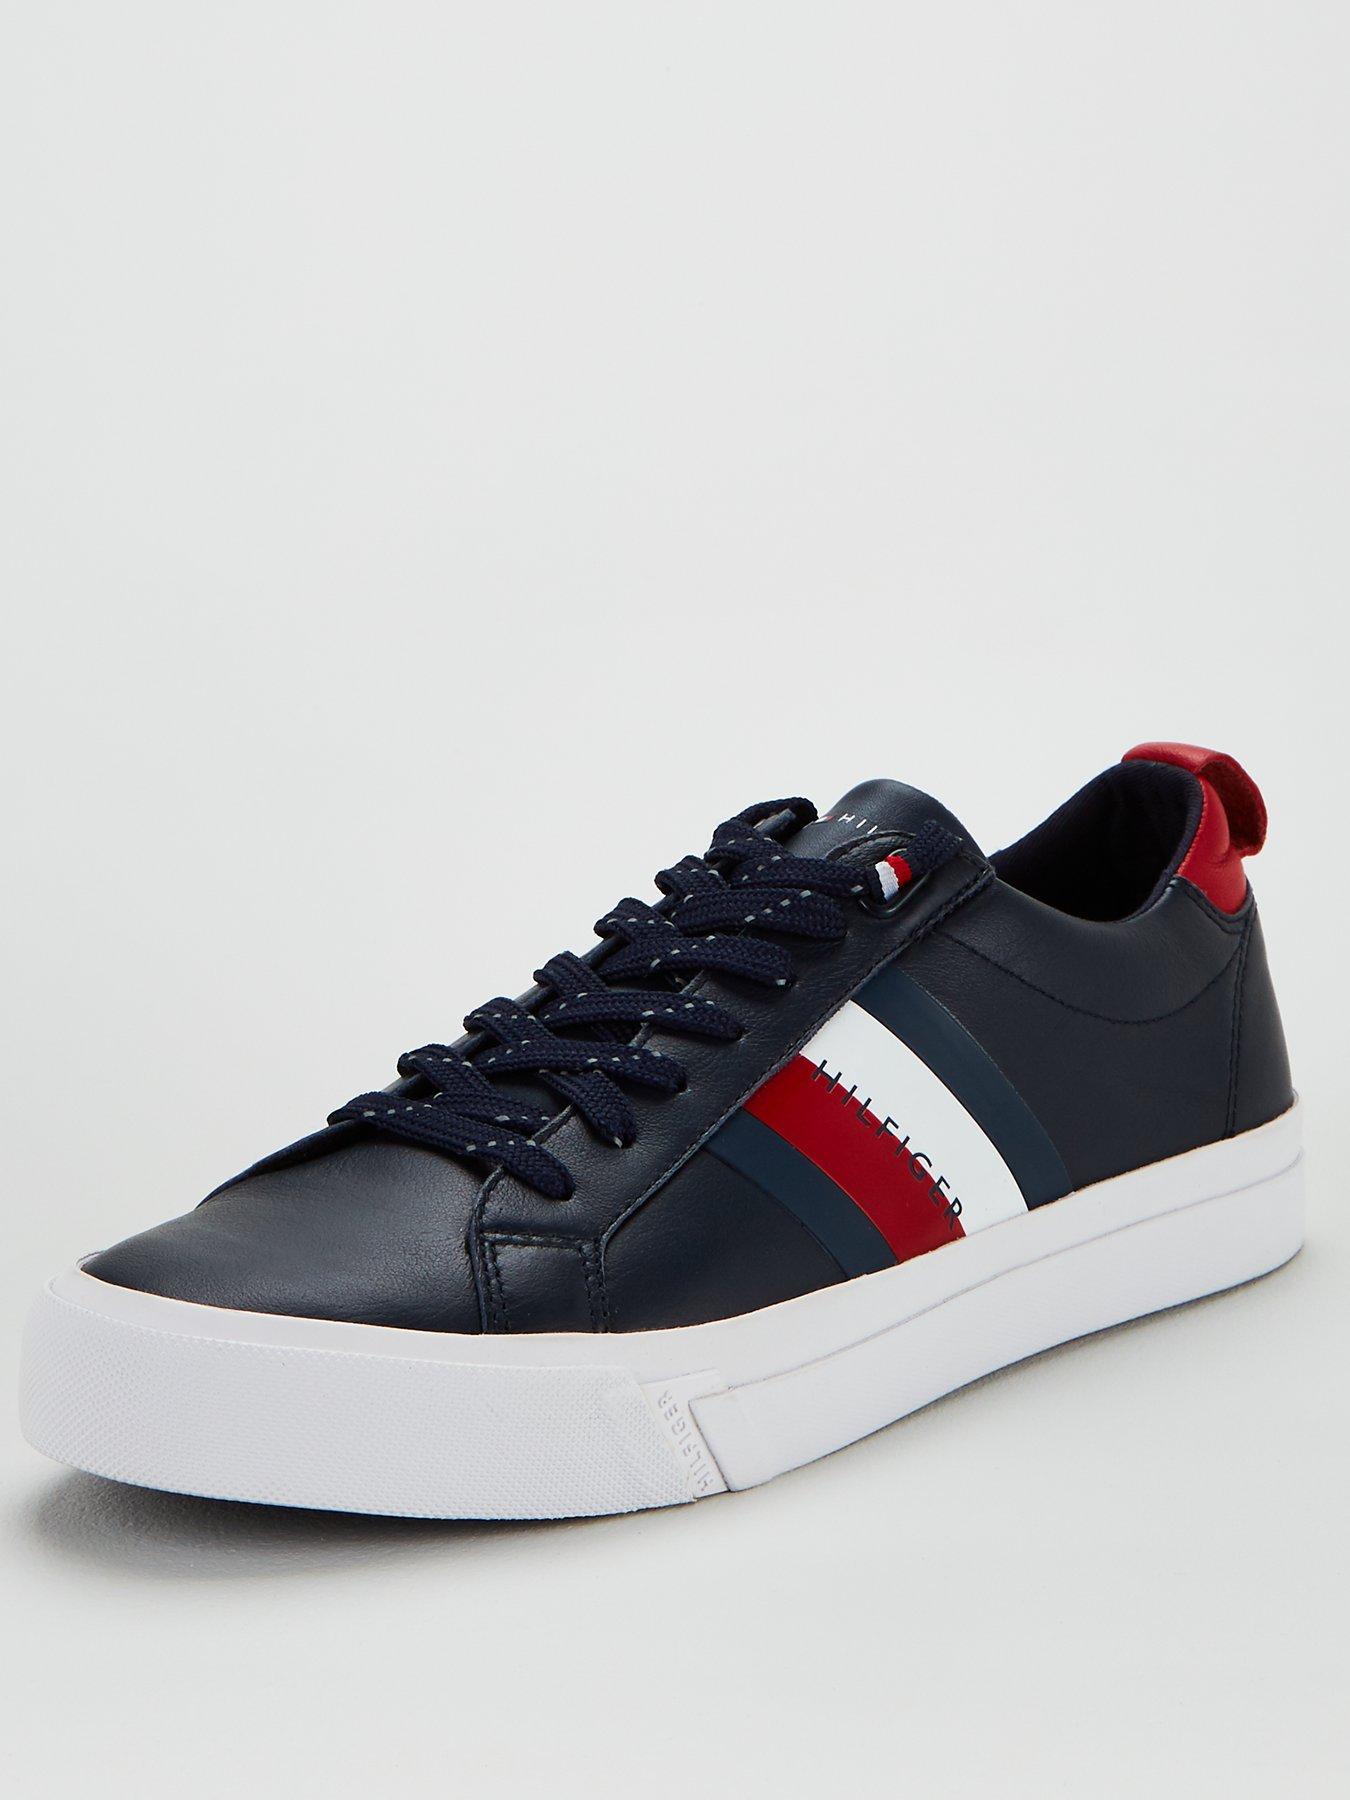 tommy hilfiger trainers size 6